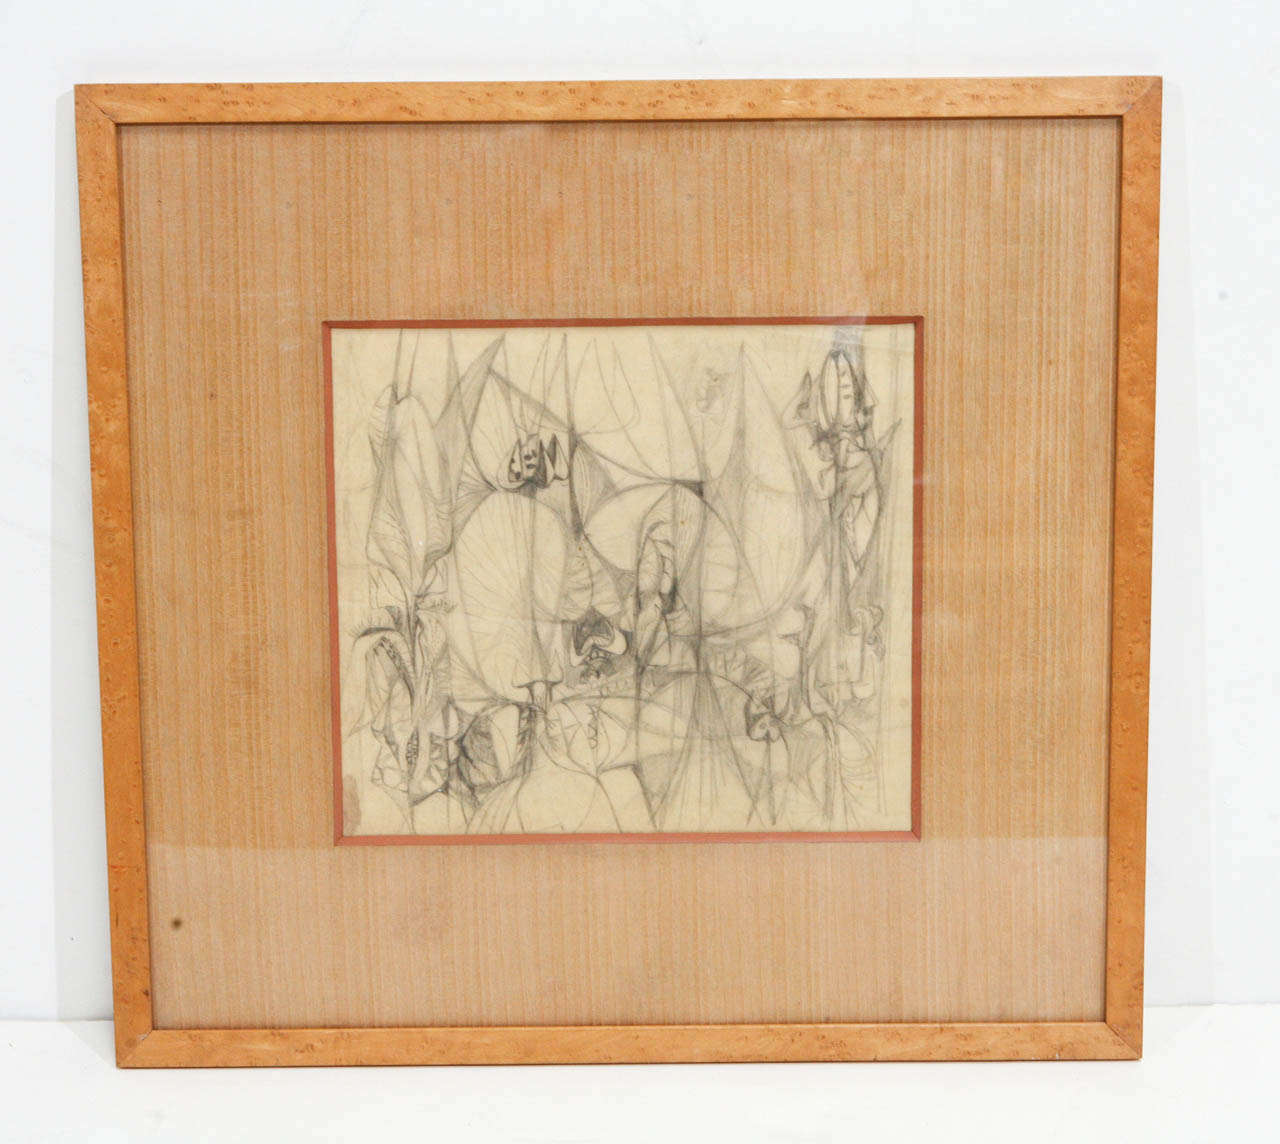 Midcentury abstract pencil sketch with light taupe matting framed in burled wood.